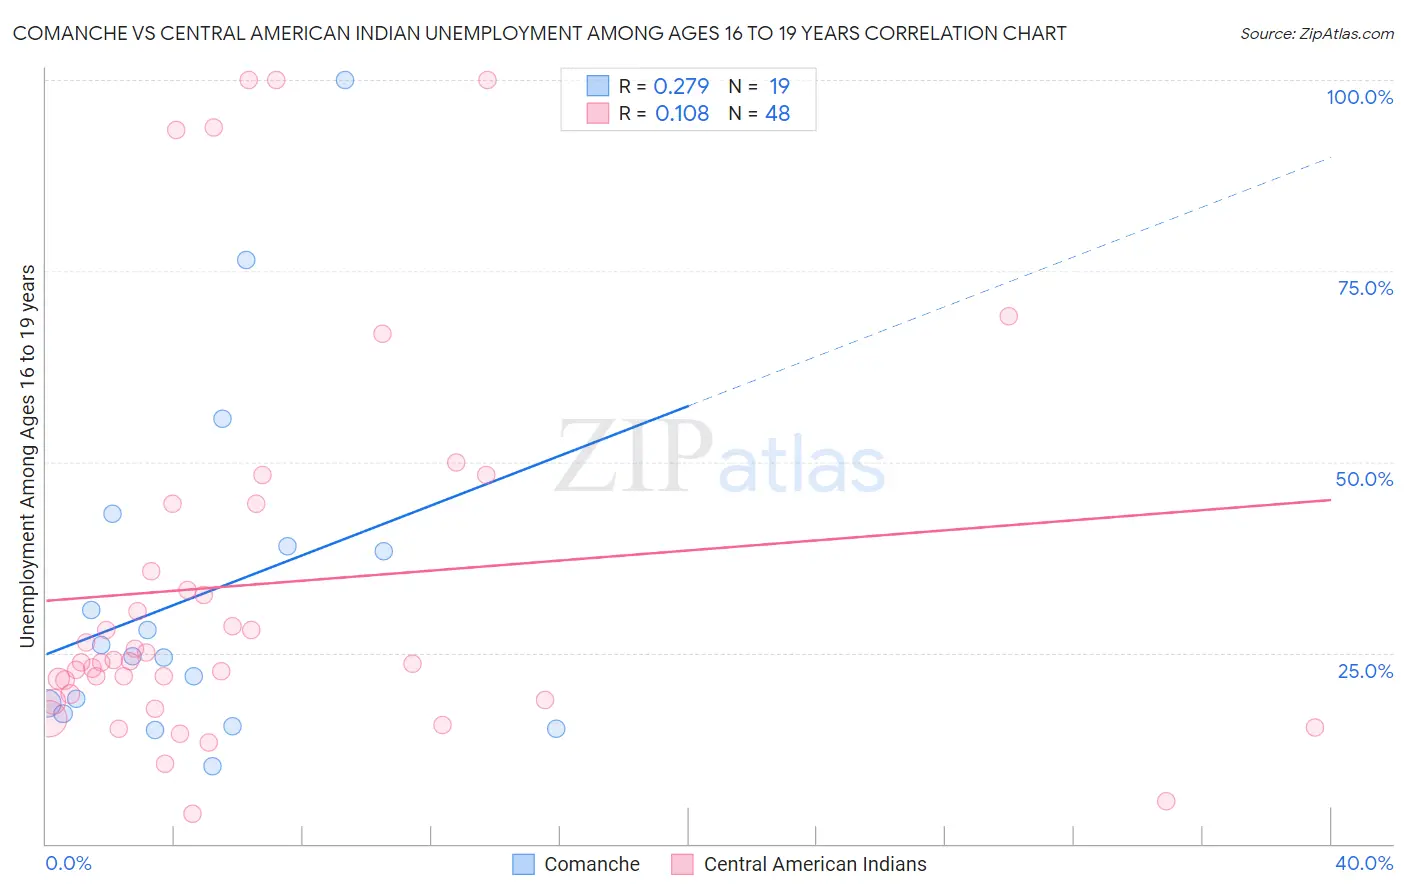 Comanche vs Central American Indian Unemployment Among Ages 16 to 19 years